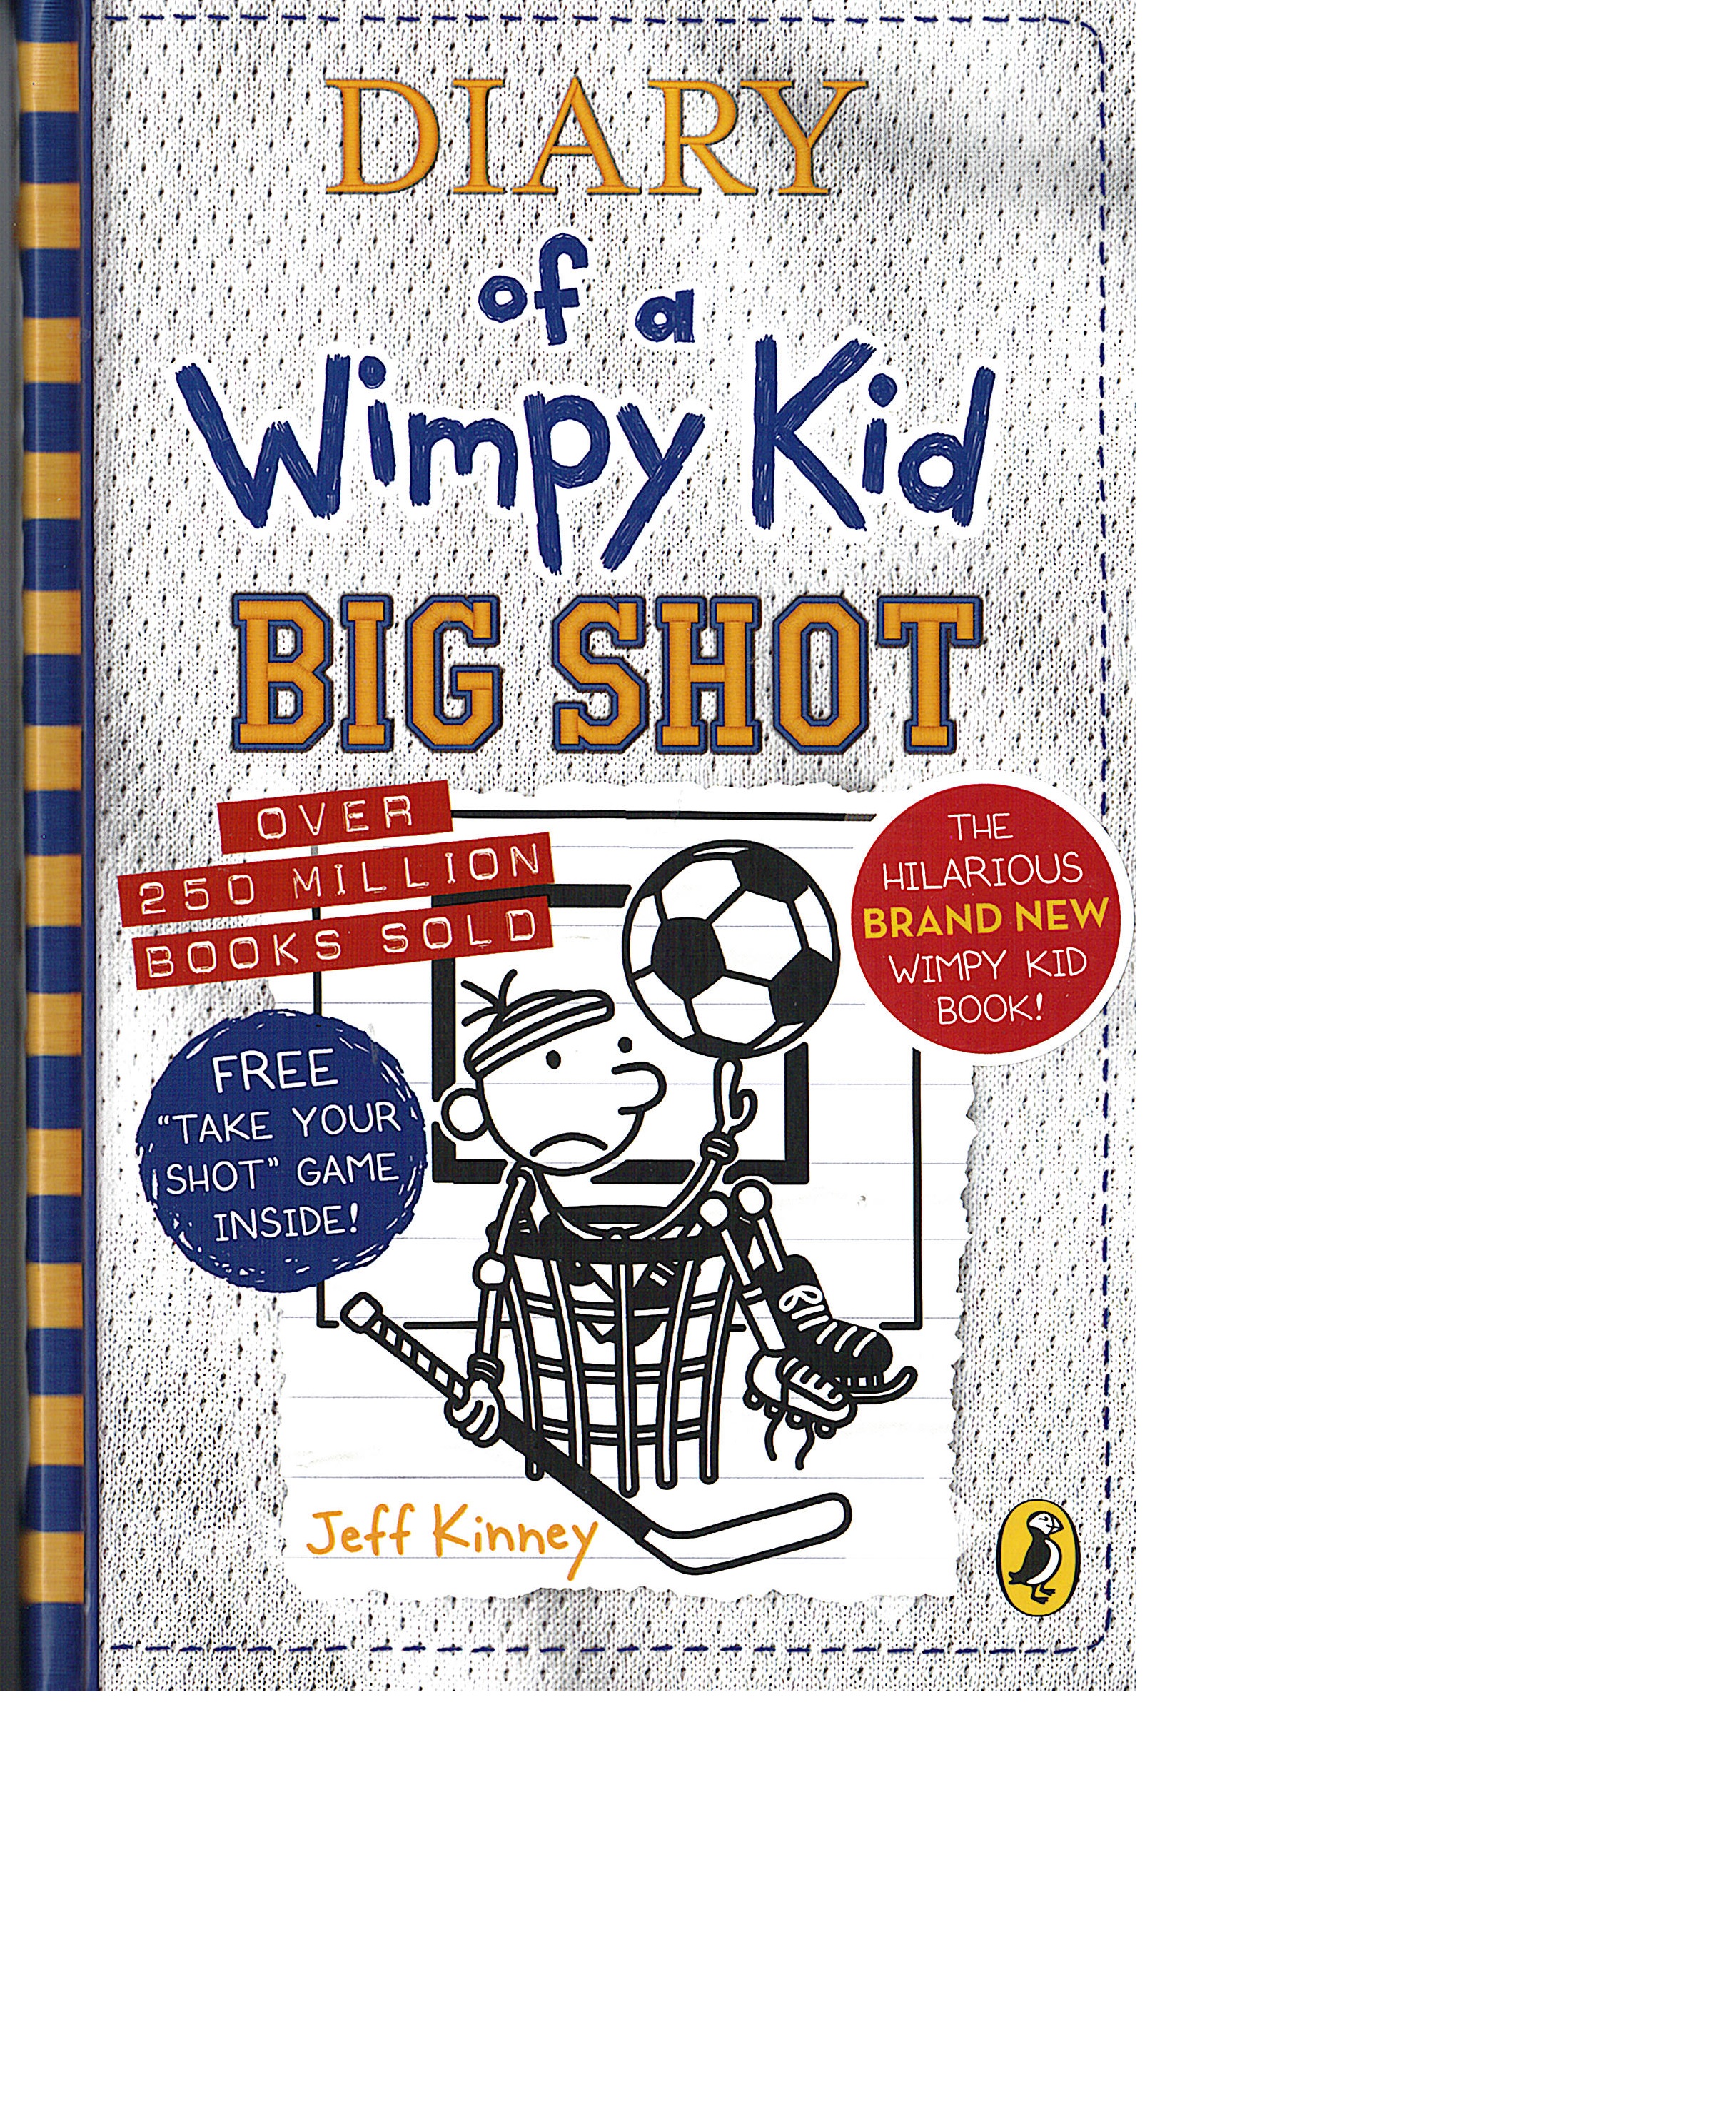 Diary of a Wimpy Kid 16 : Big Shot